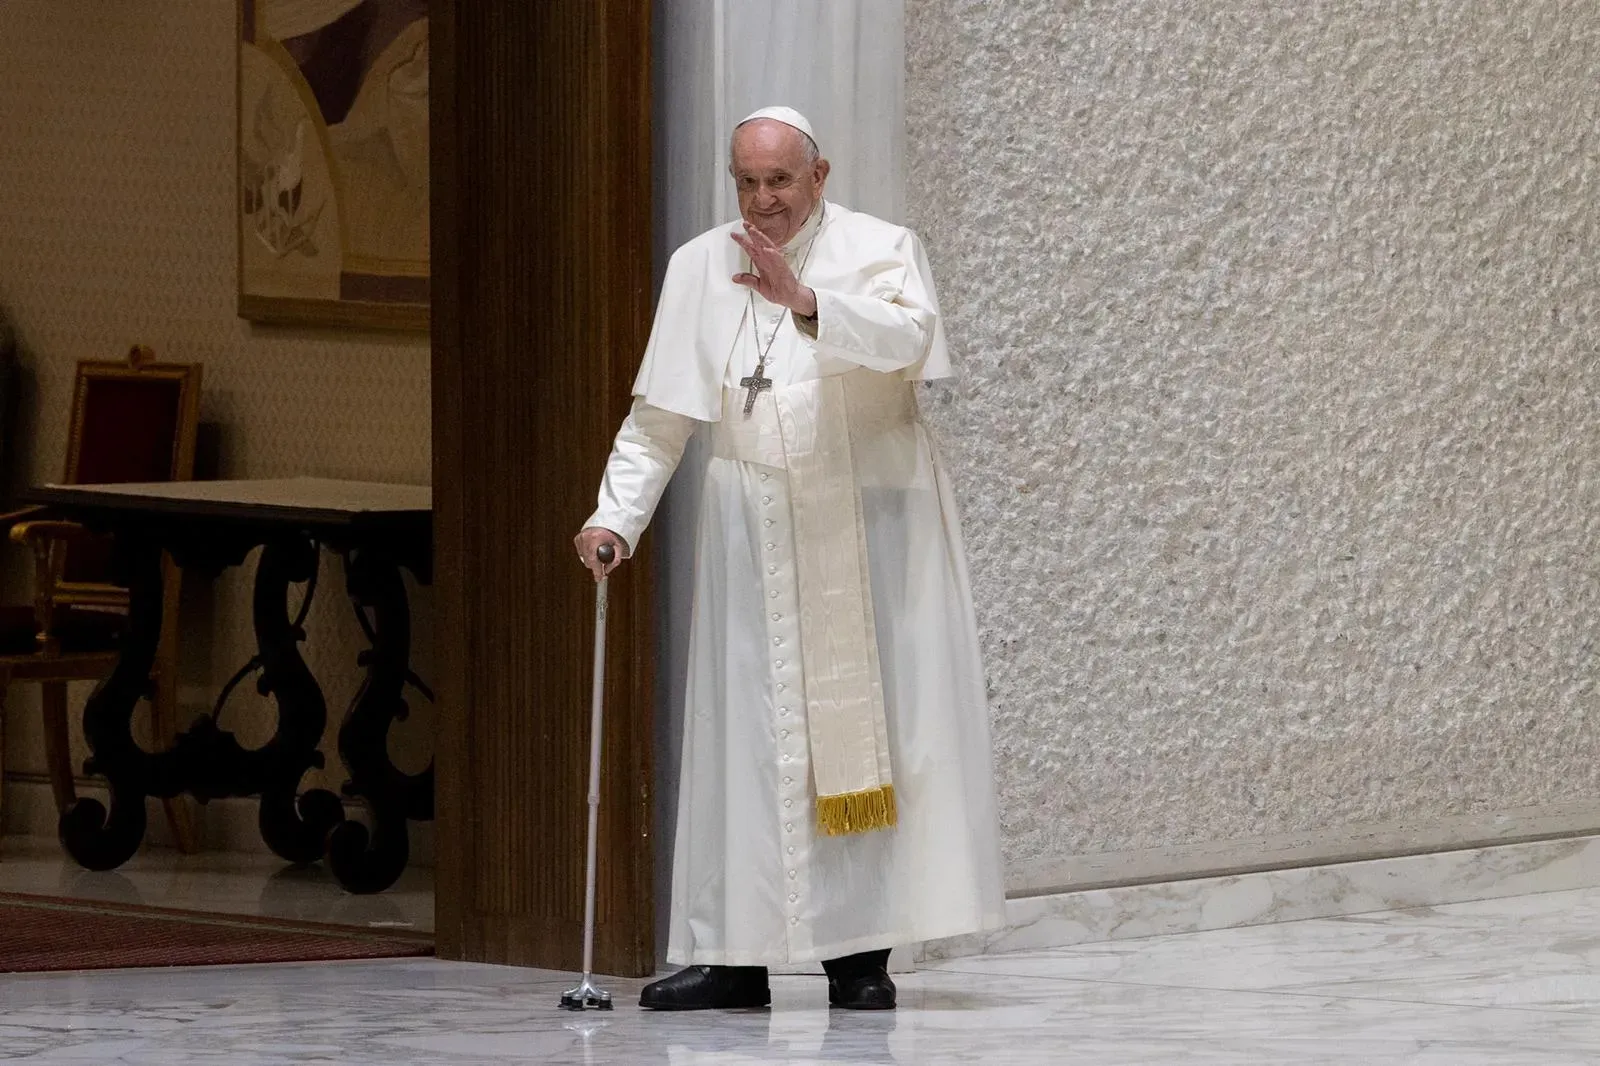 Pope Francis walked with a cane into Paul VI Hall for his Wednesday audience on Aug. 3, 2022. Daniel Ibanez/CNA